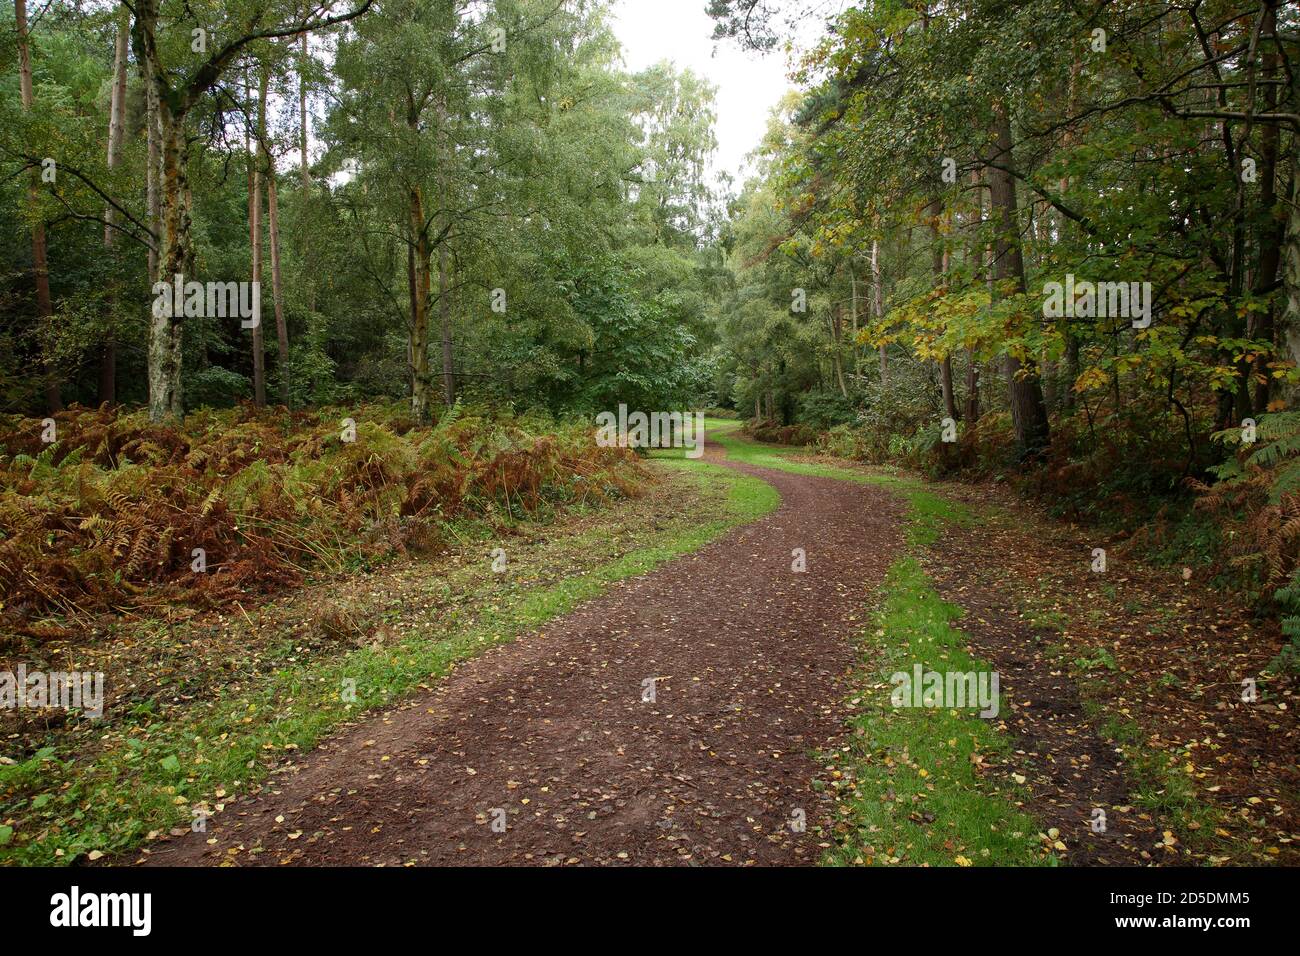 Public footpath in the woods on Kinver edge, Staffordshire, England, UK. Stock Photo